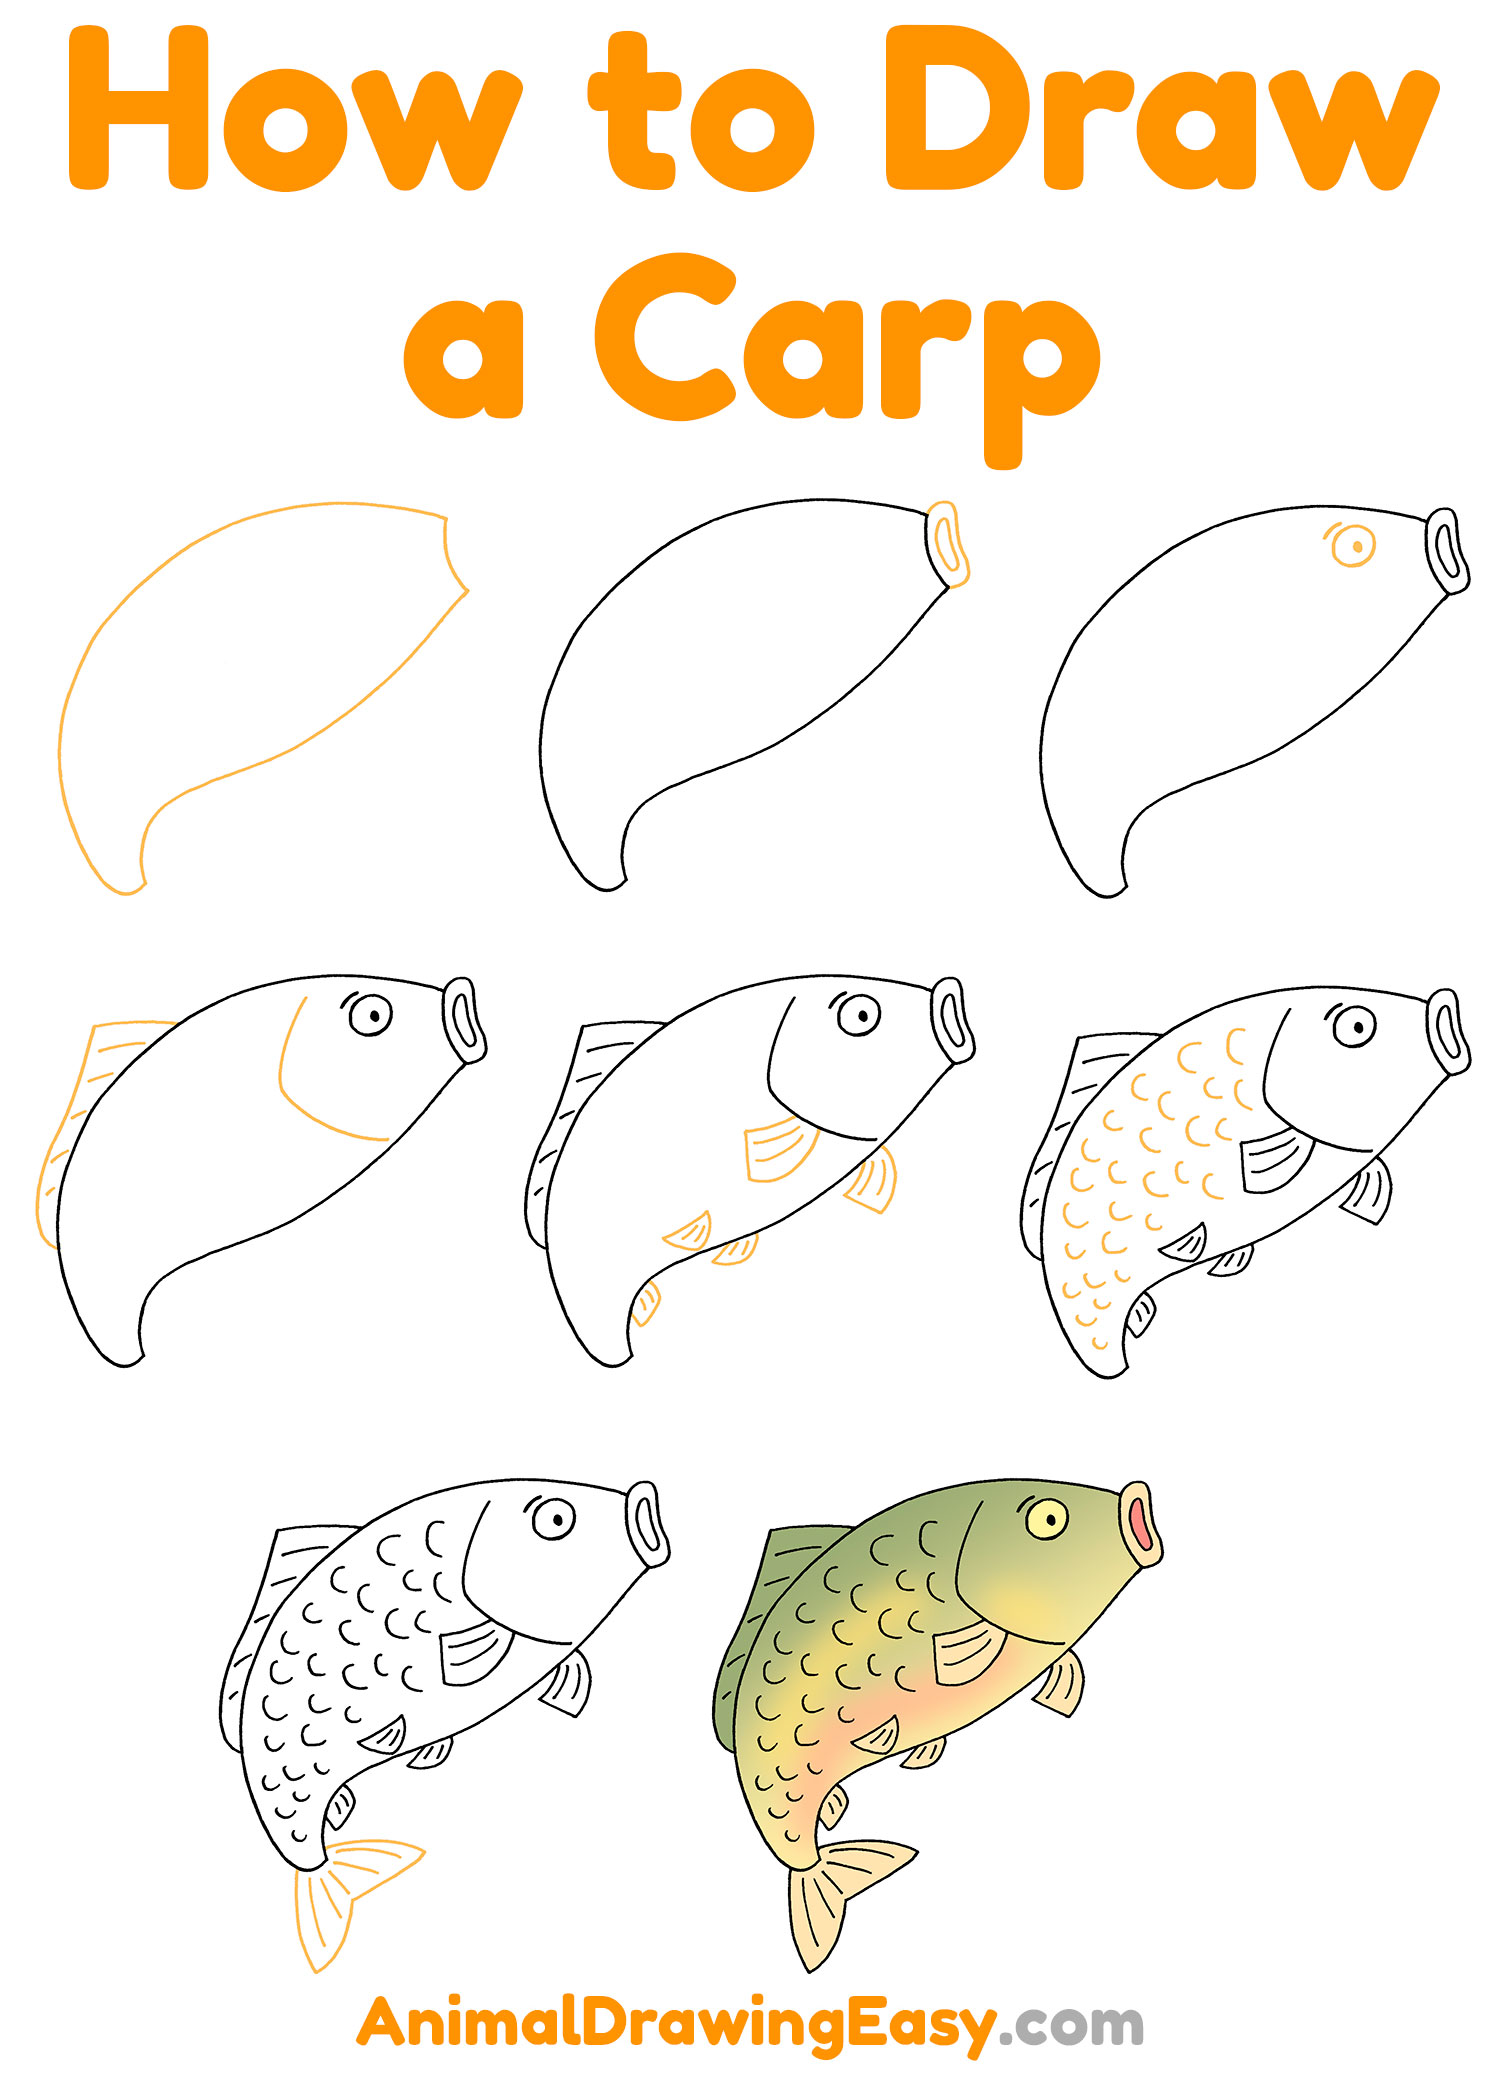 How to Draw a Carp Step by Step